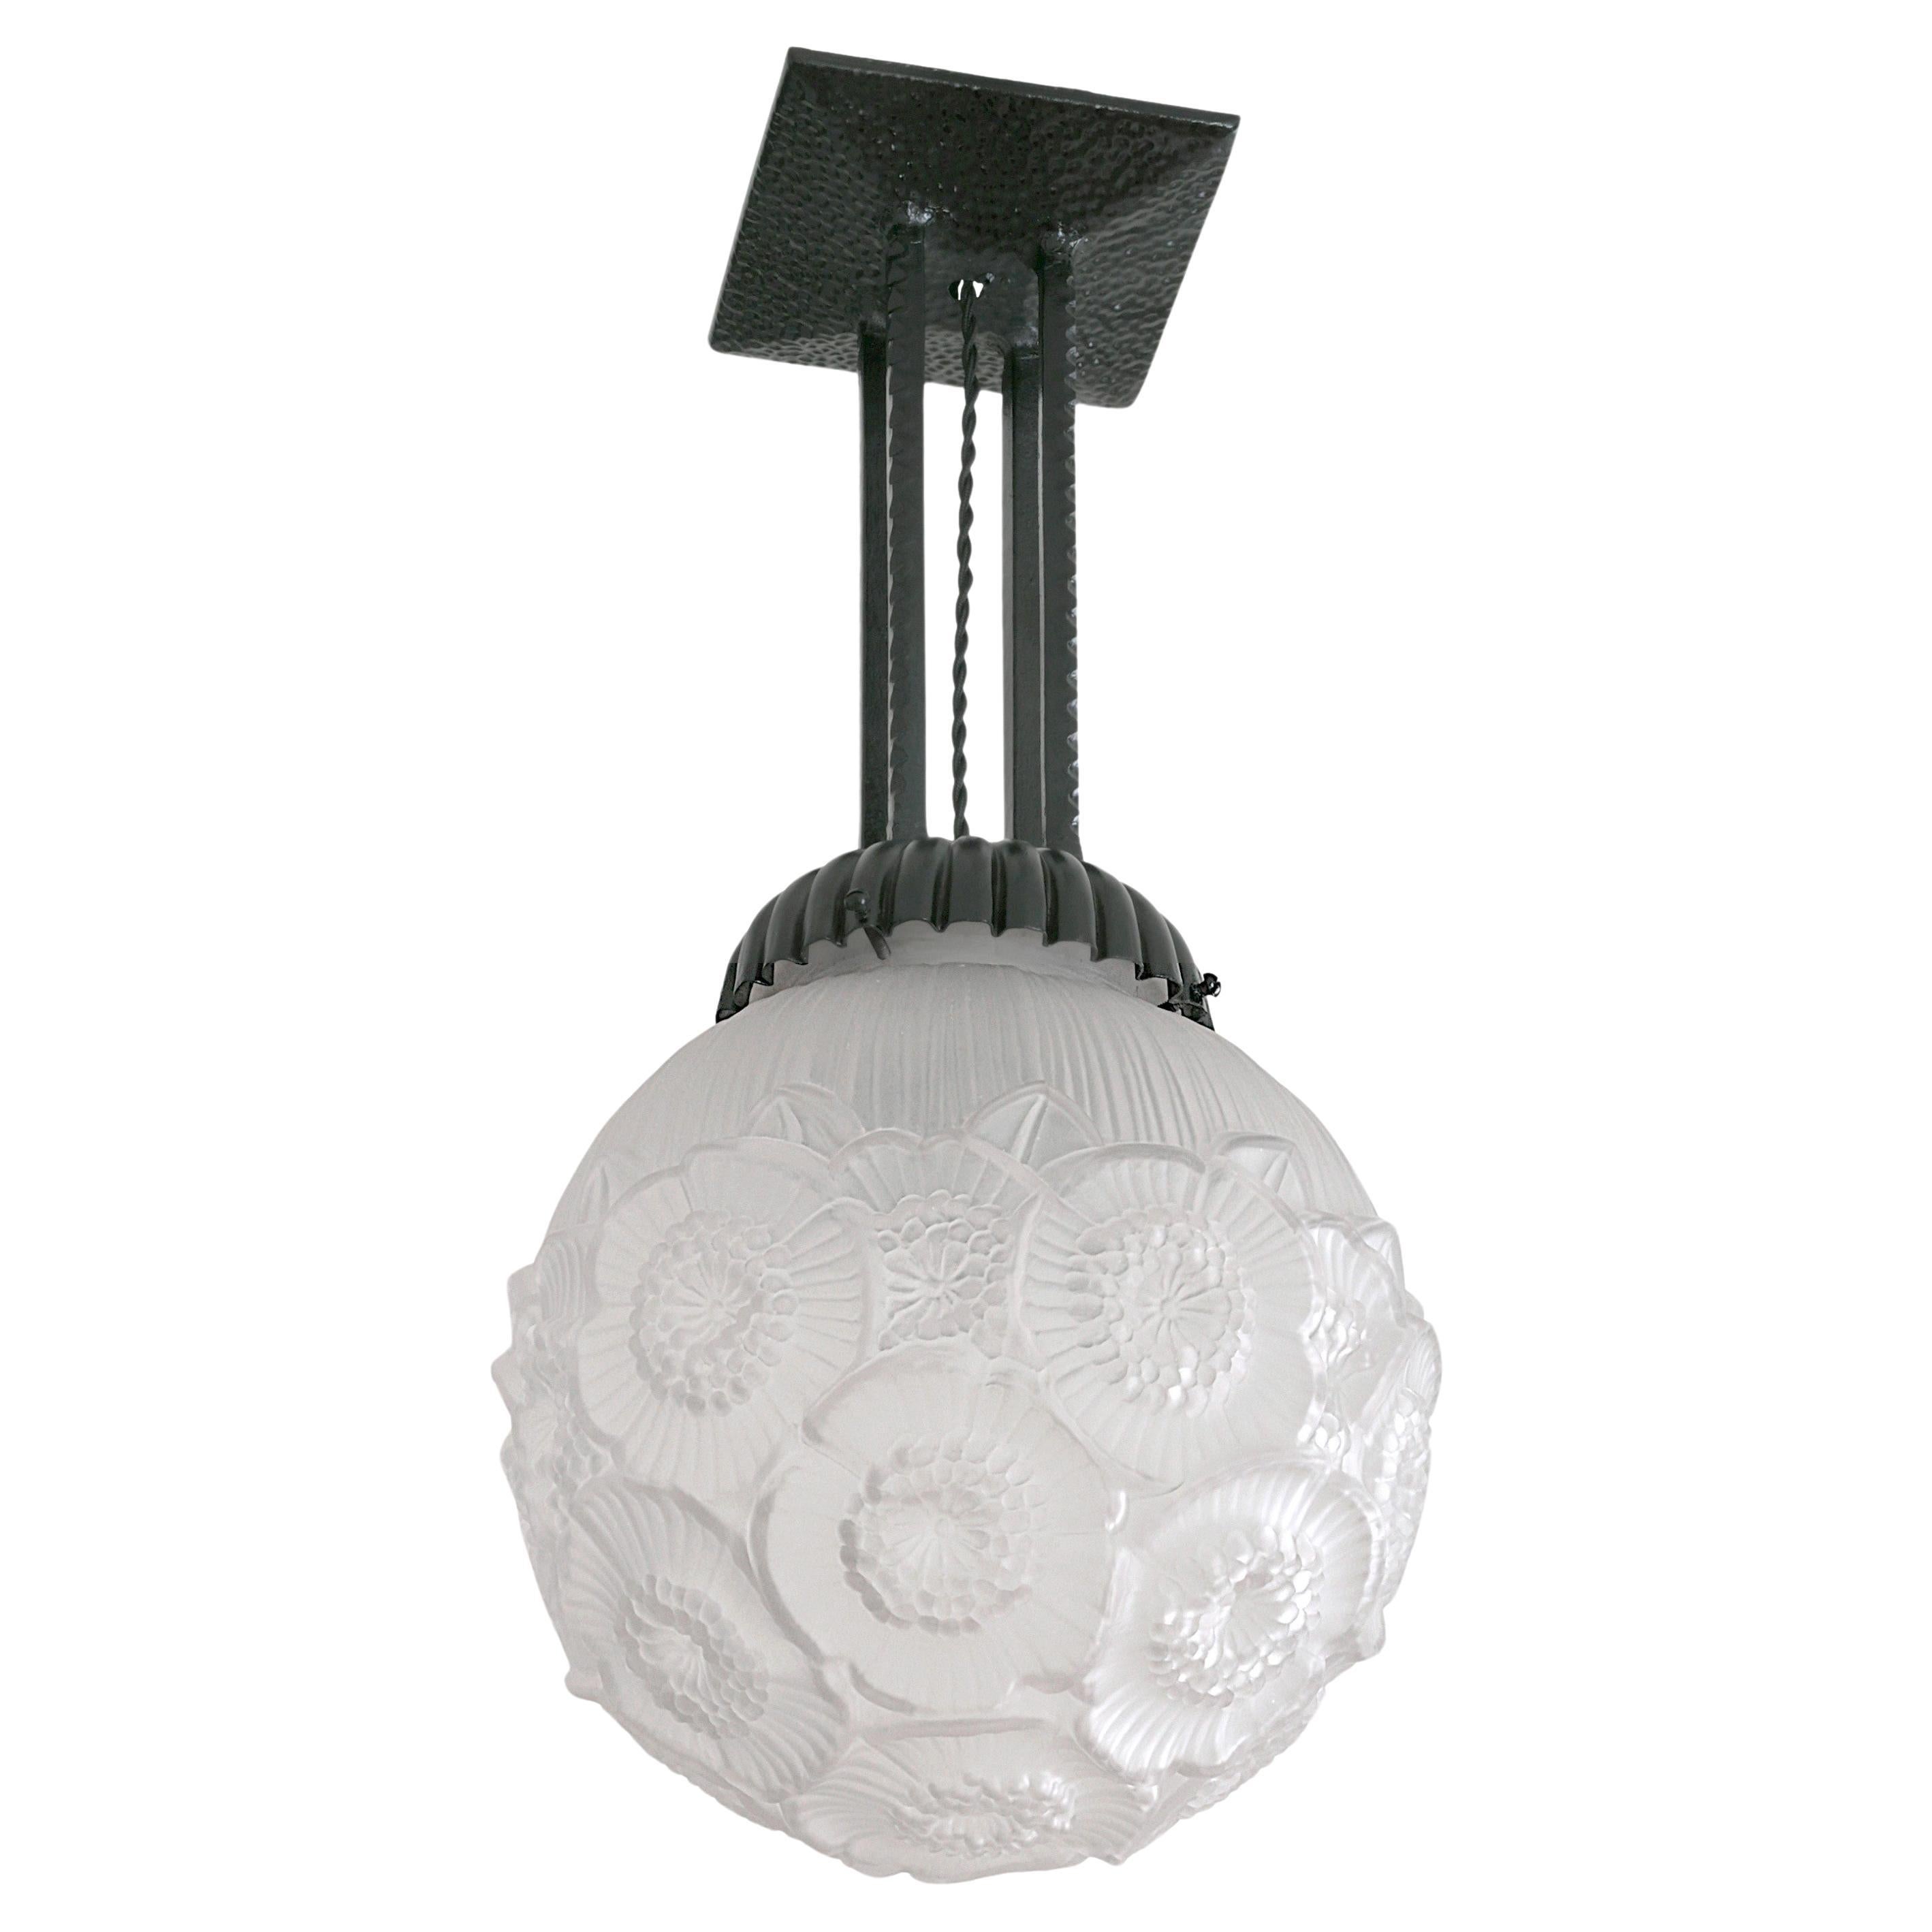 Maurice Model Large French Art Deco Floral Ball Pendant Chandelier, Early 1930s For Sale